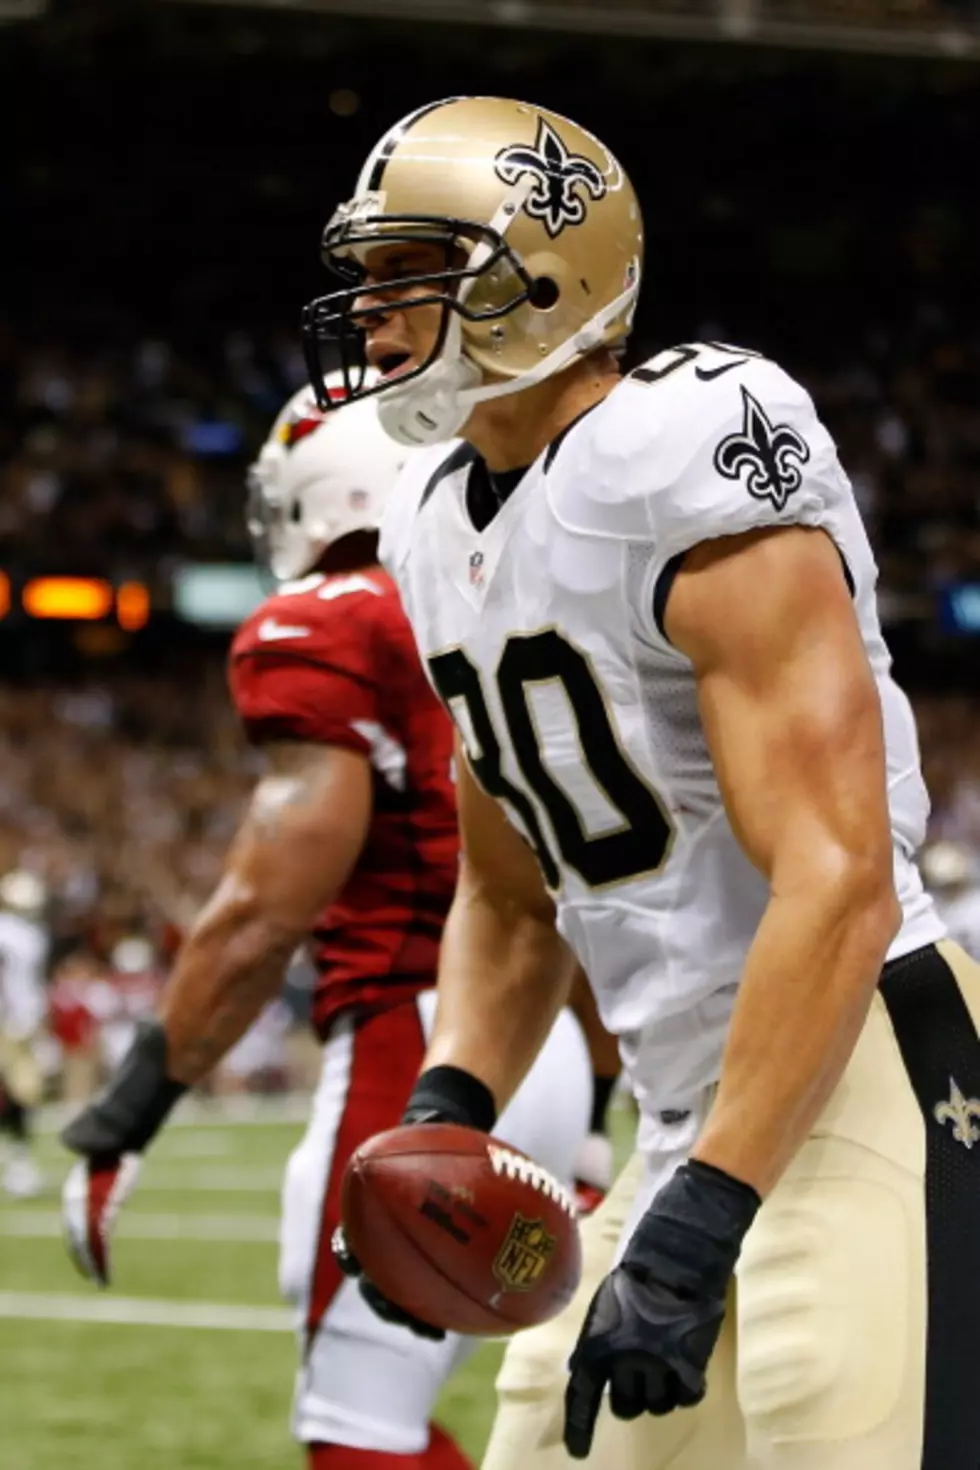 Beyond The Mic: Will The Saints Use The Franchise Tag On Jimmy Graham? Probably